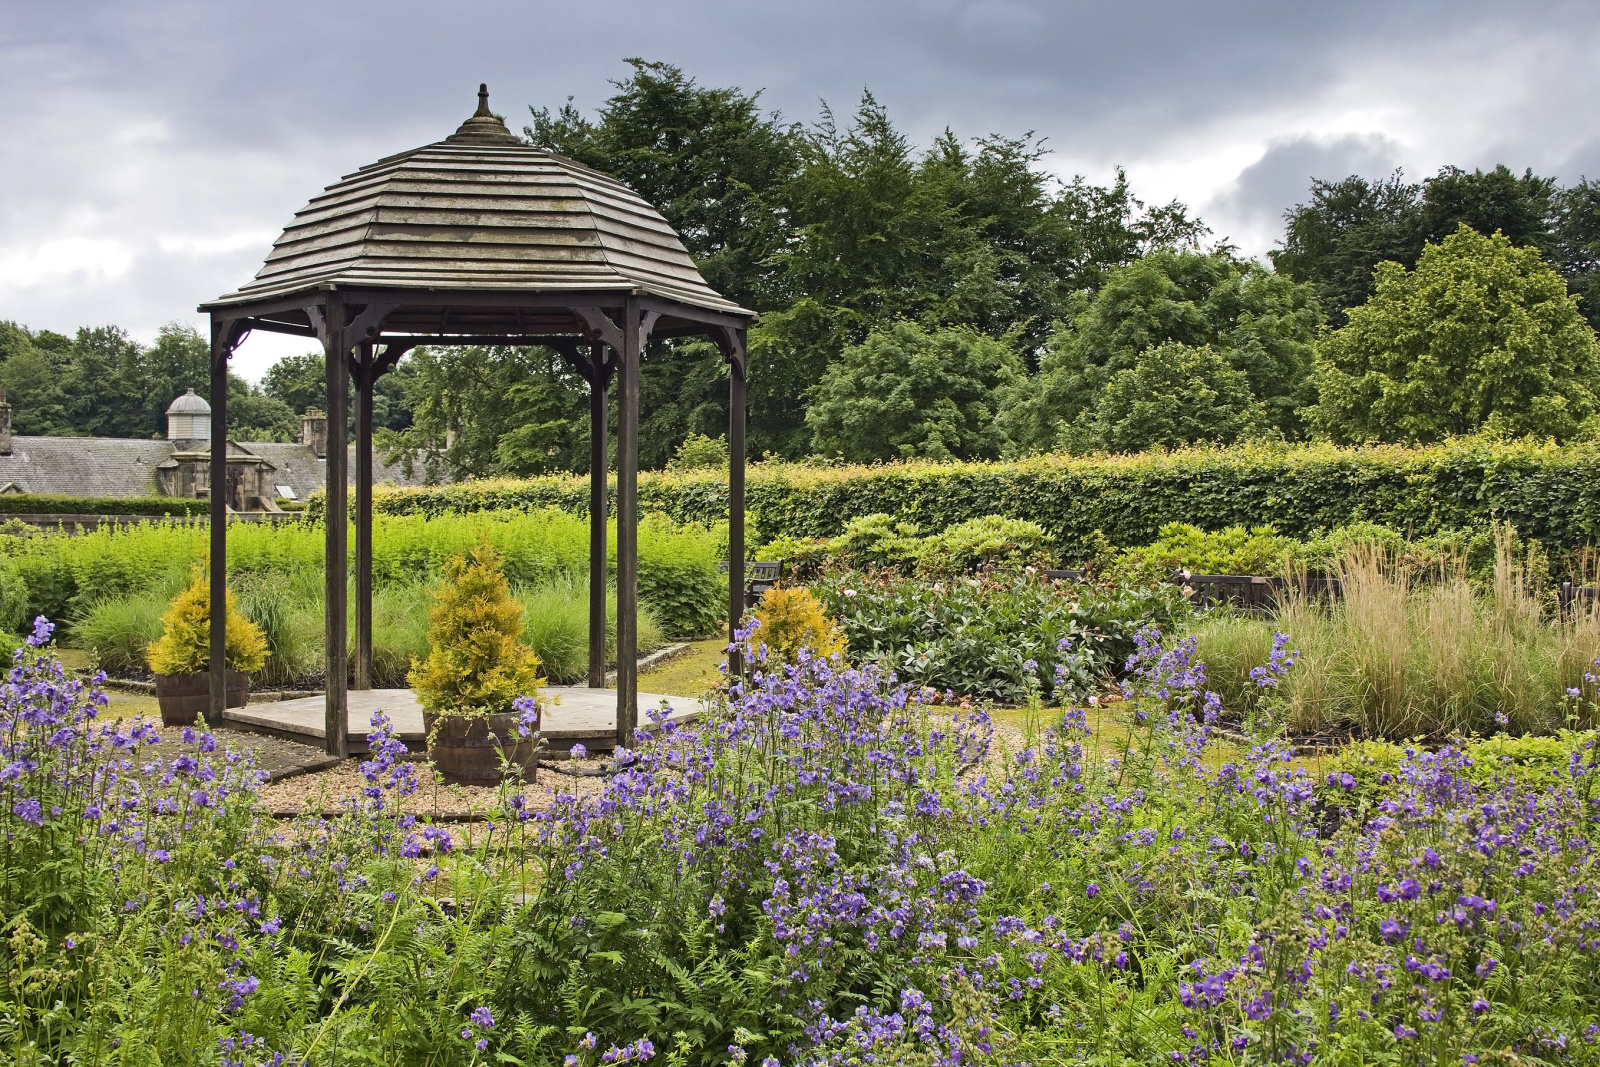 A beautiful bandstand like folly in Pollok Park Gardens